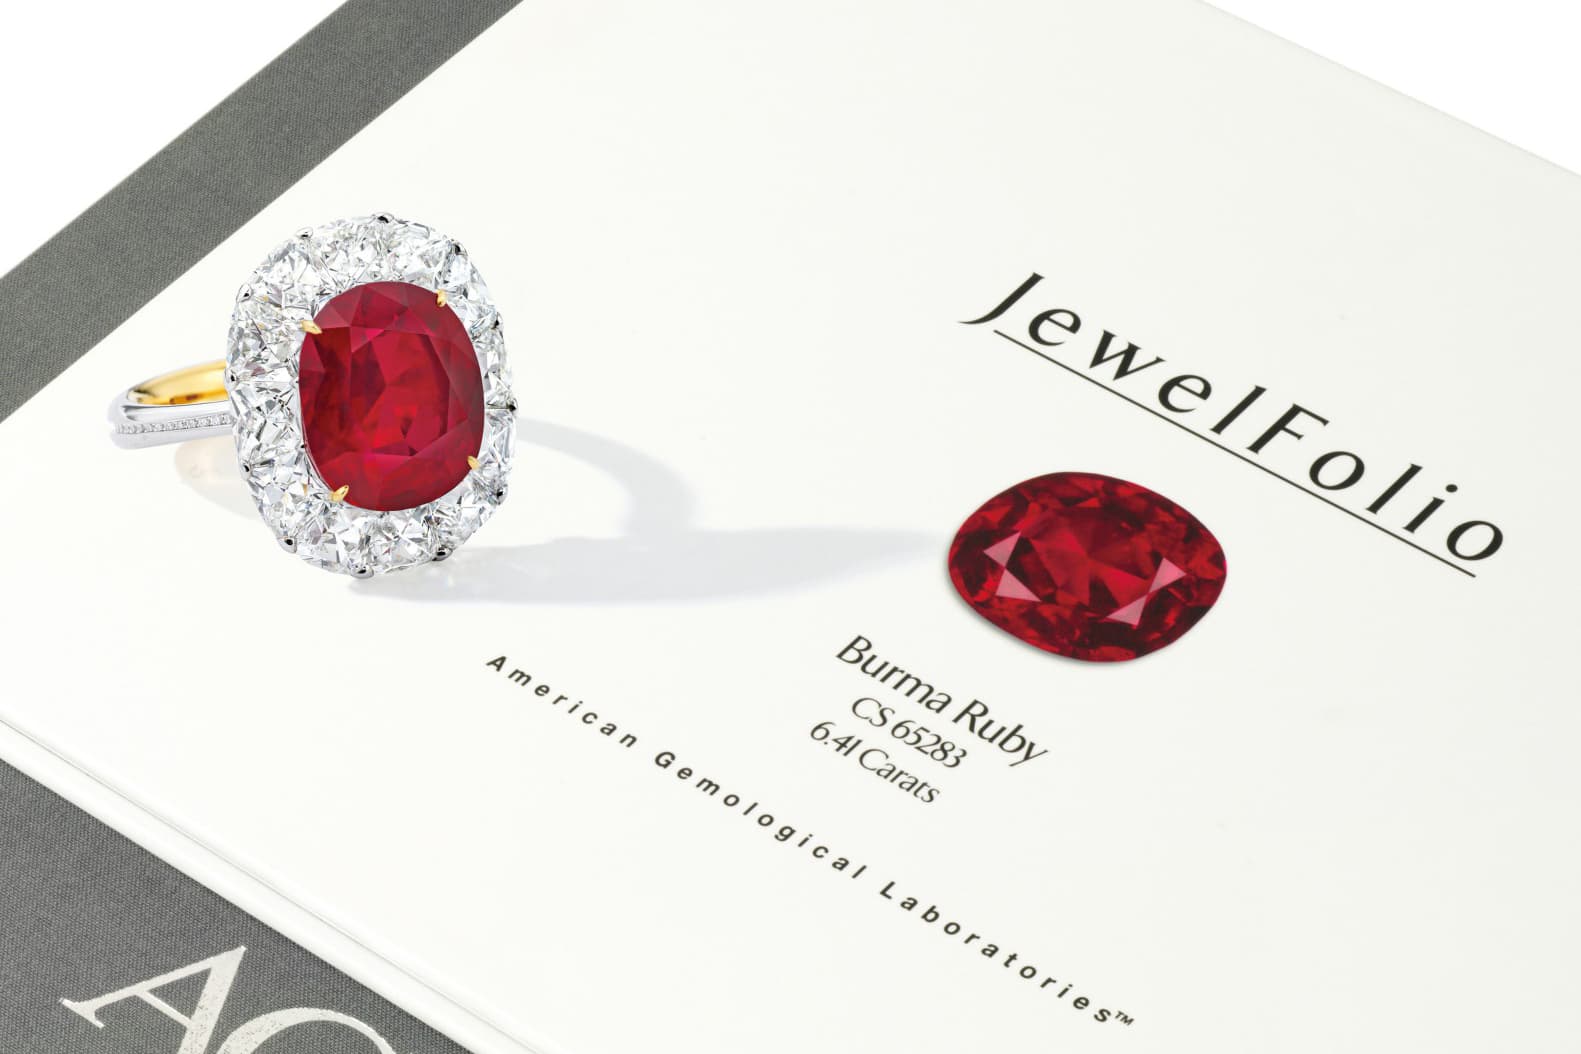 A 6.41 carat Burmese ruby and diamond ring, designed and mounted by Forms, with French-cut diamonds, sold by Sotheby’s